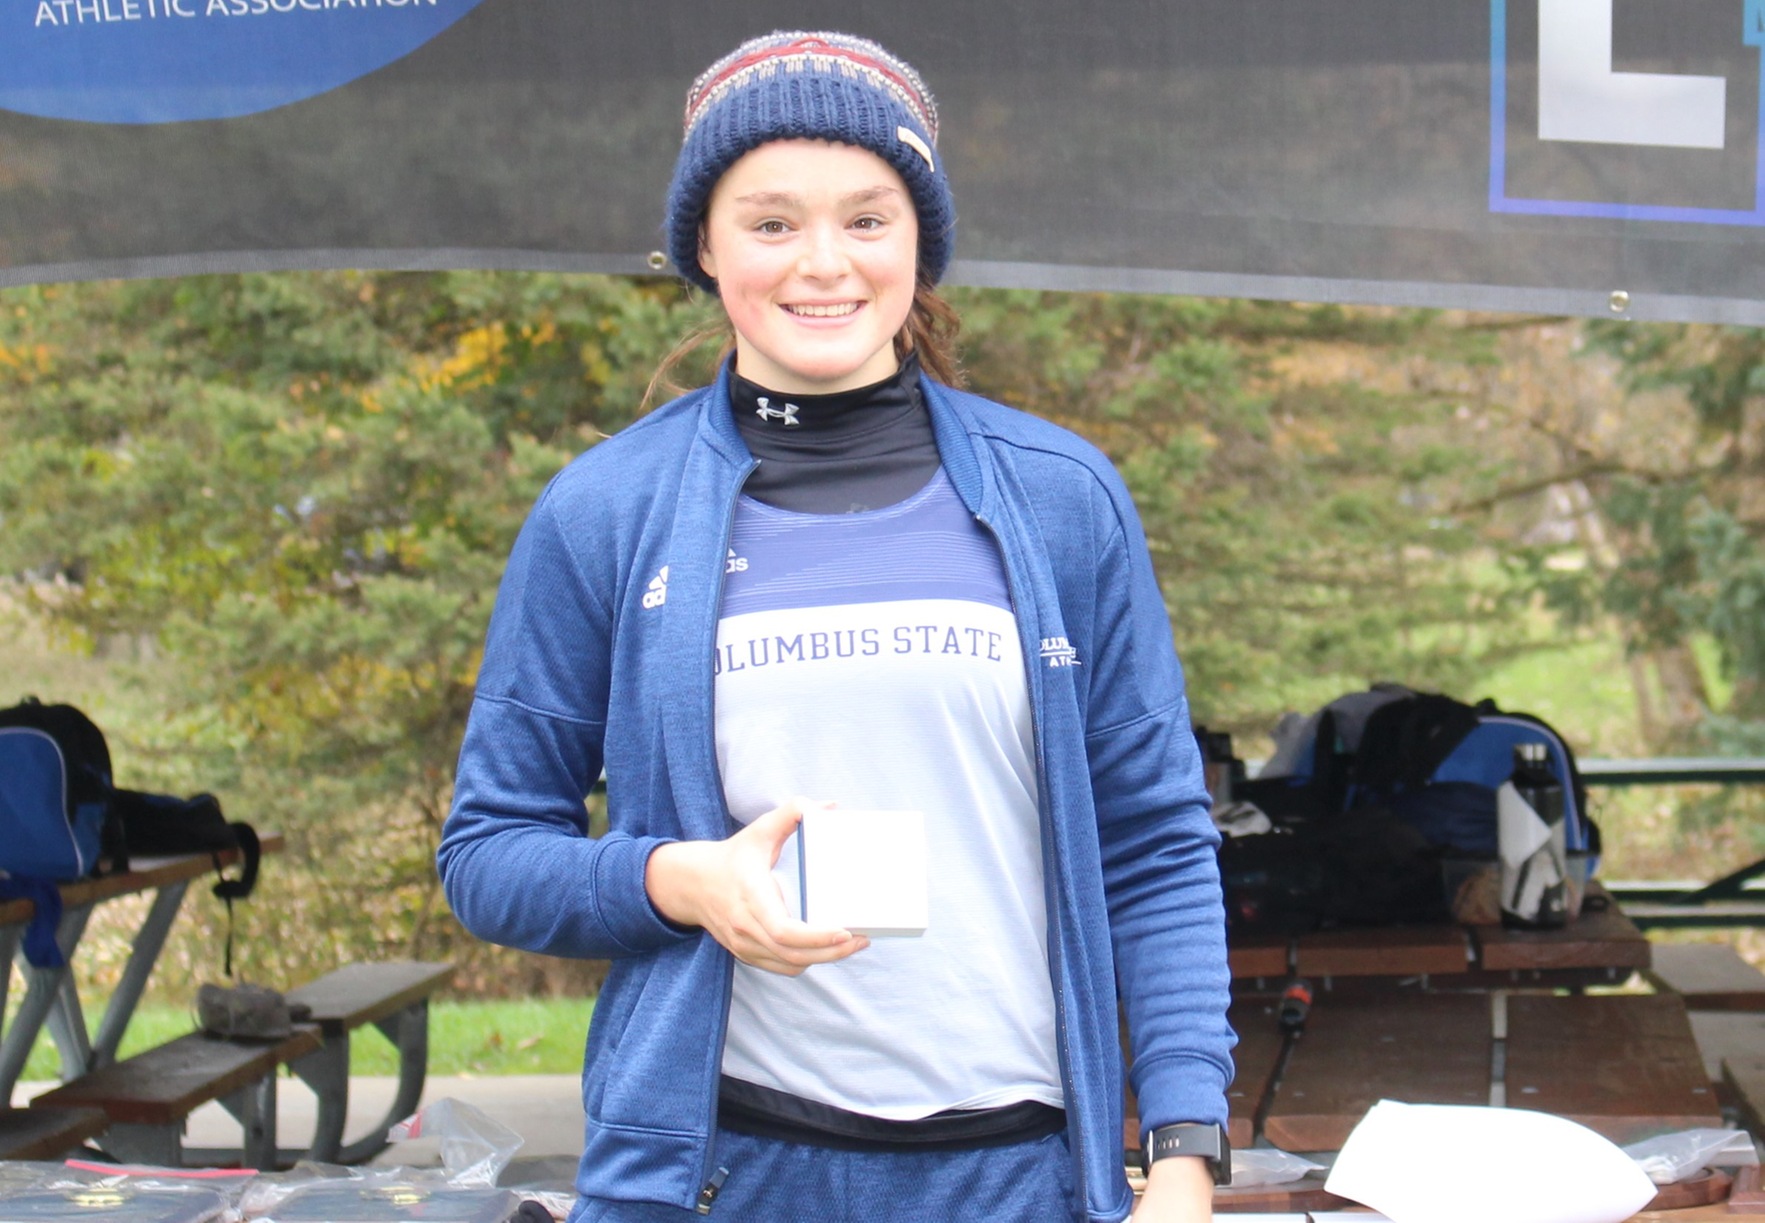 NJCAA Region XII Division III Women's Cross Country Champion: Emily Blenk of Columbus State Community College